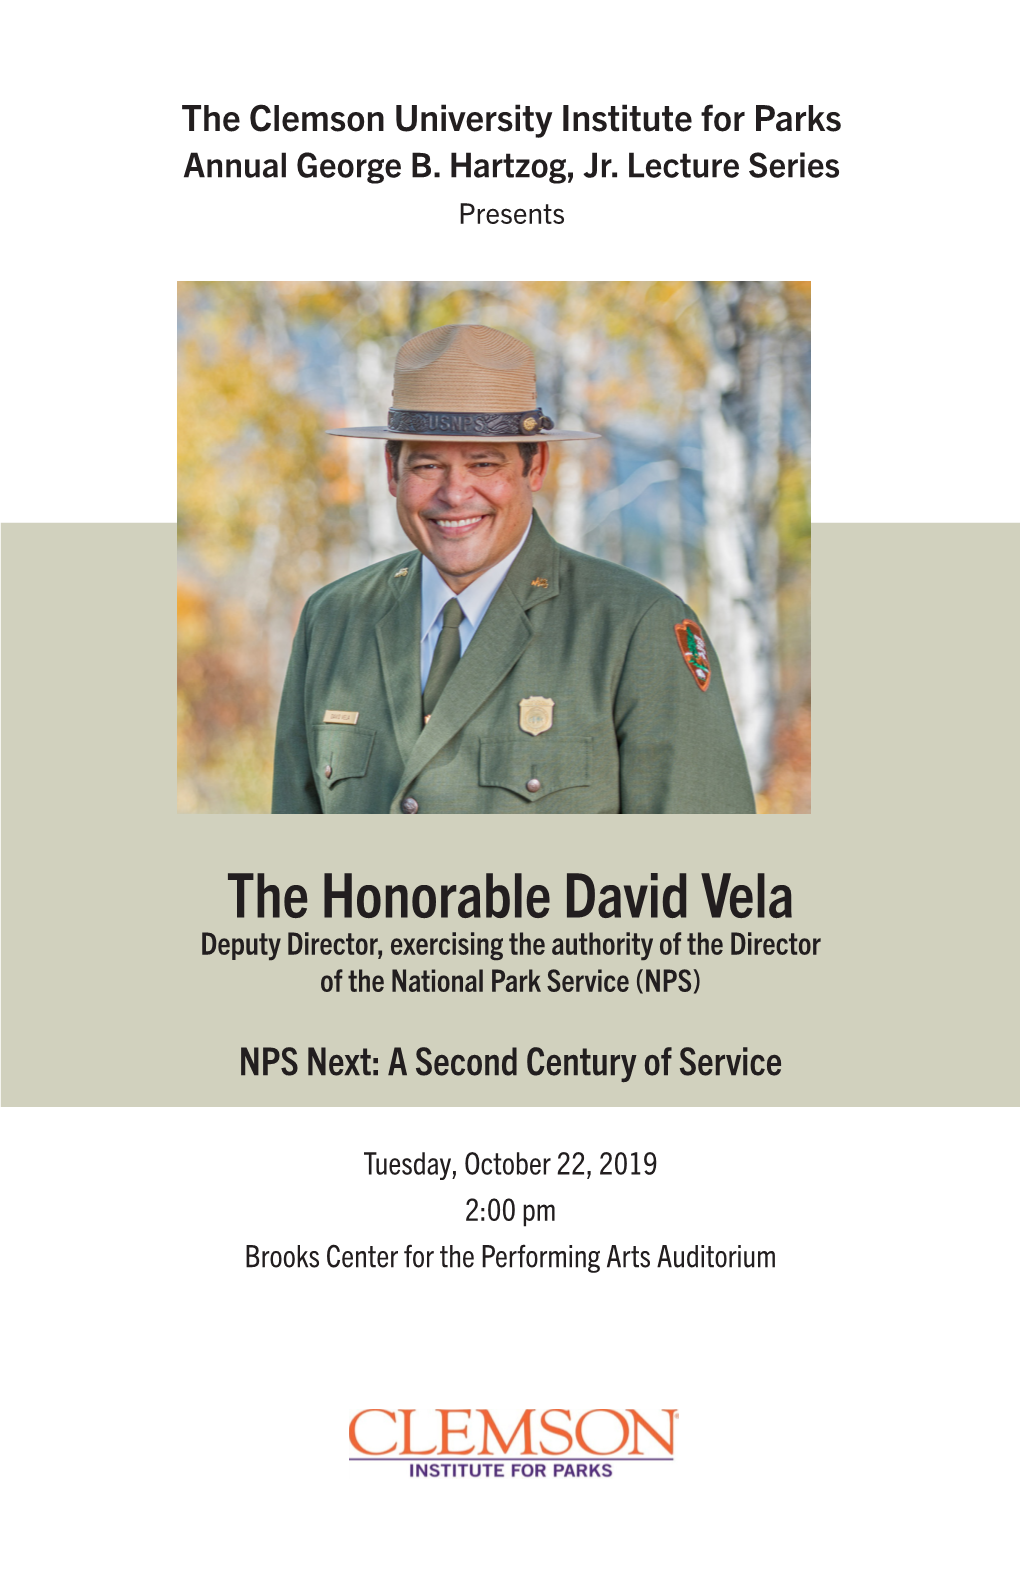 David Vela Deputy Director, Exercising the Authority of the Director of the National Park Service (NPS)